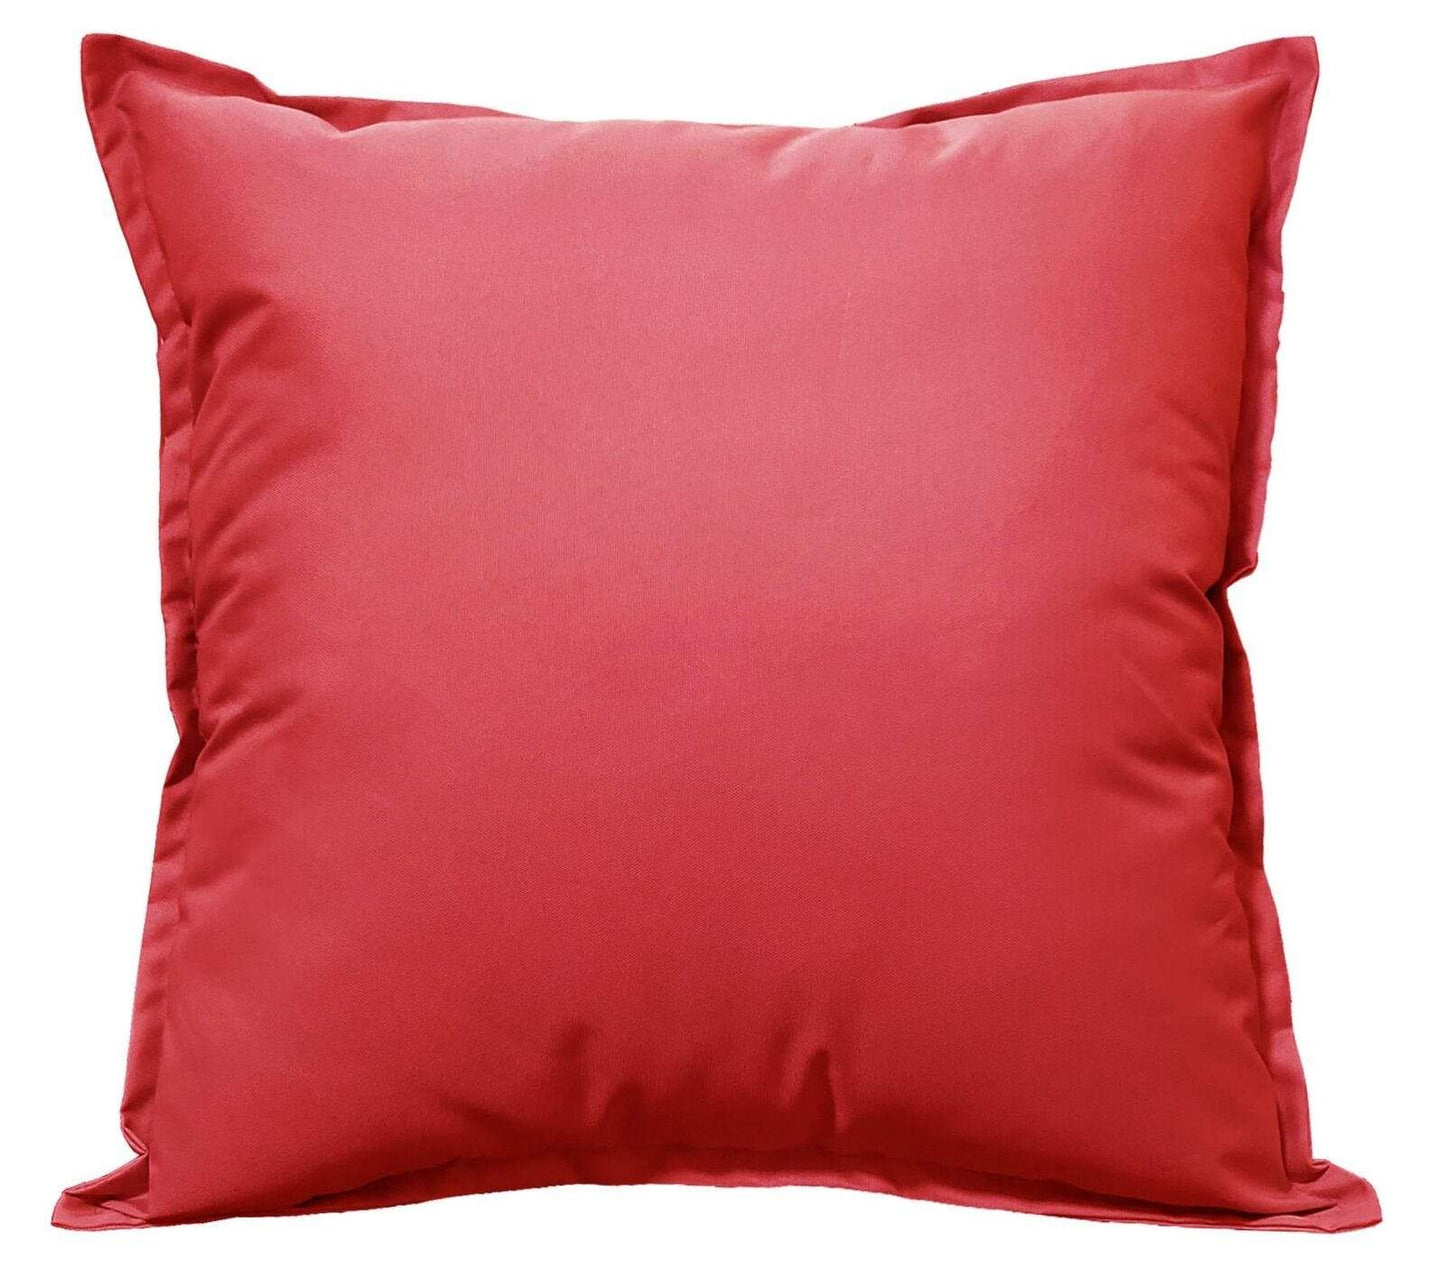 Outdoor Waterproof Cushions RED / 43 x 43 cm OLIVIA ROCCO Cushions